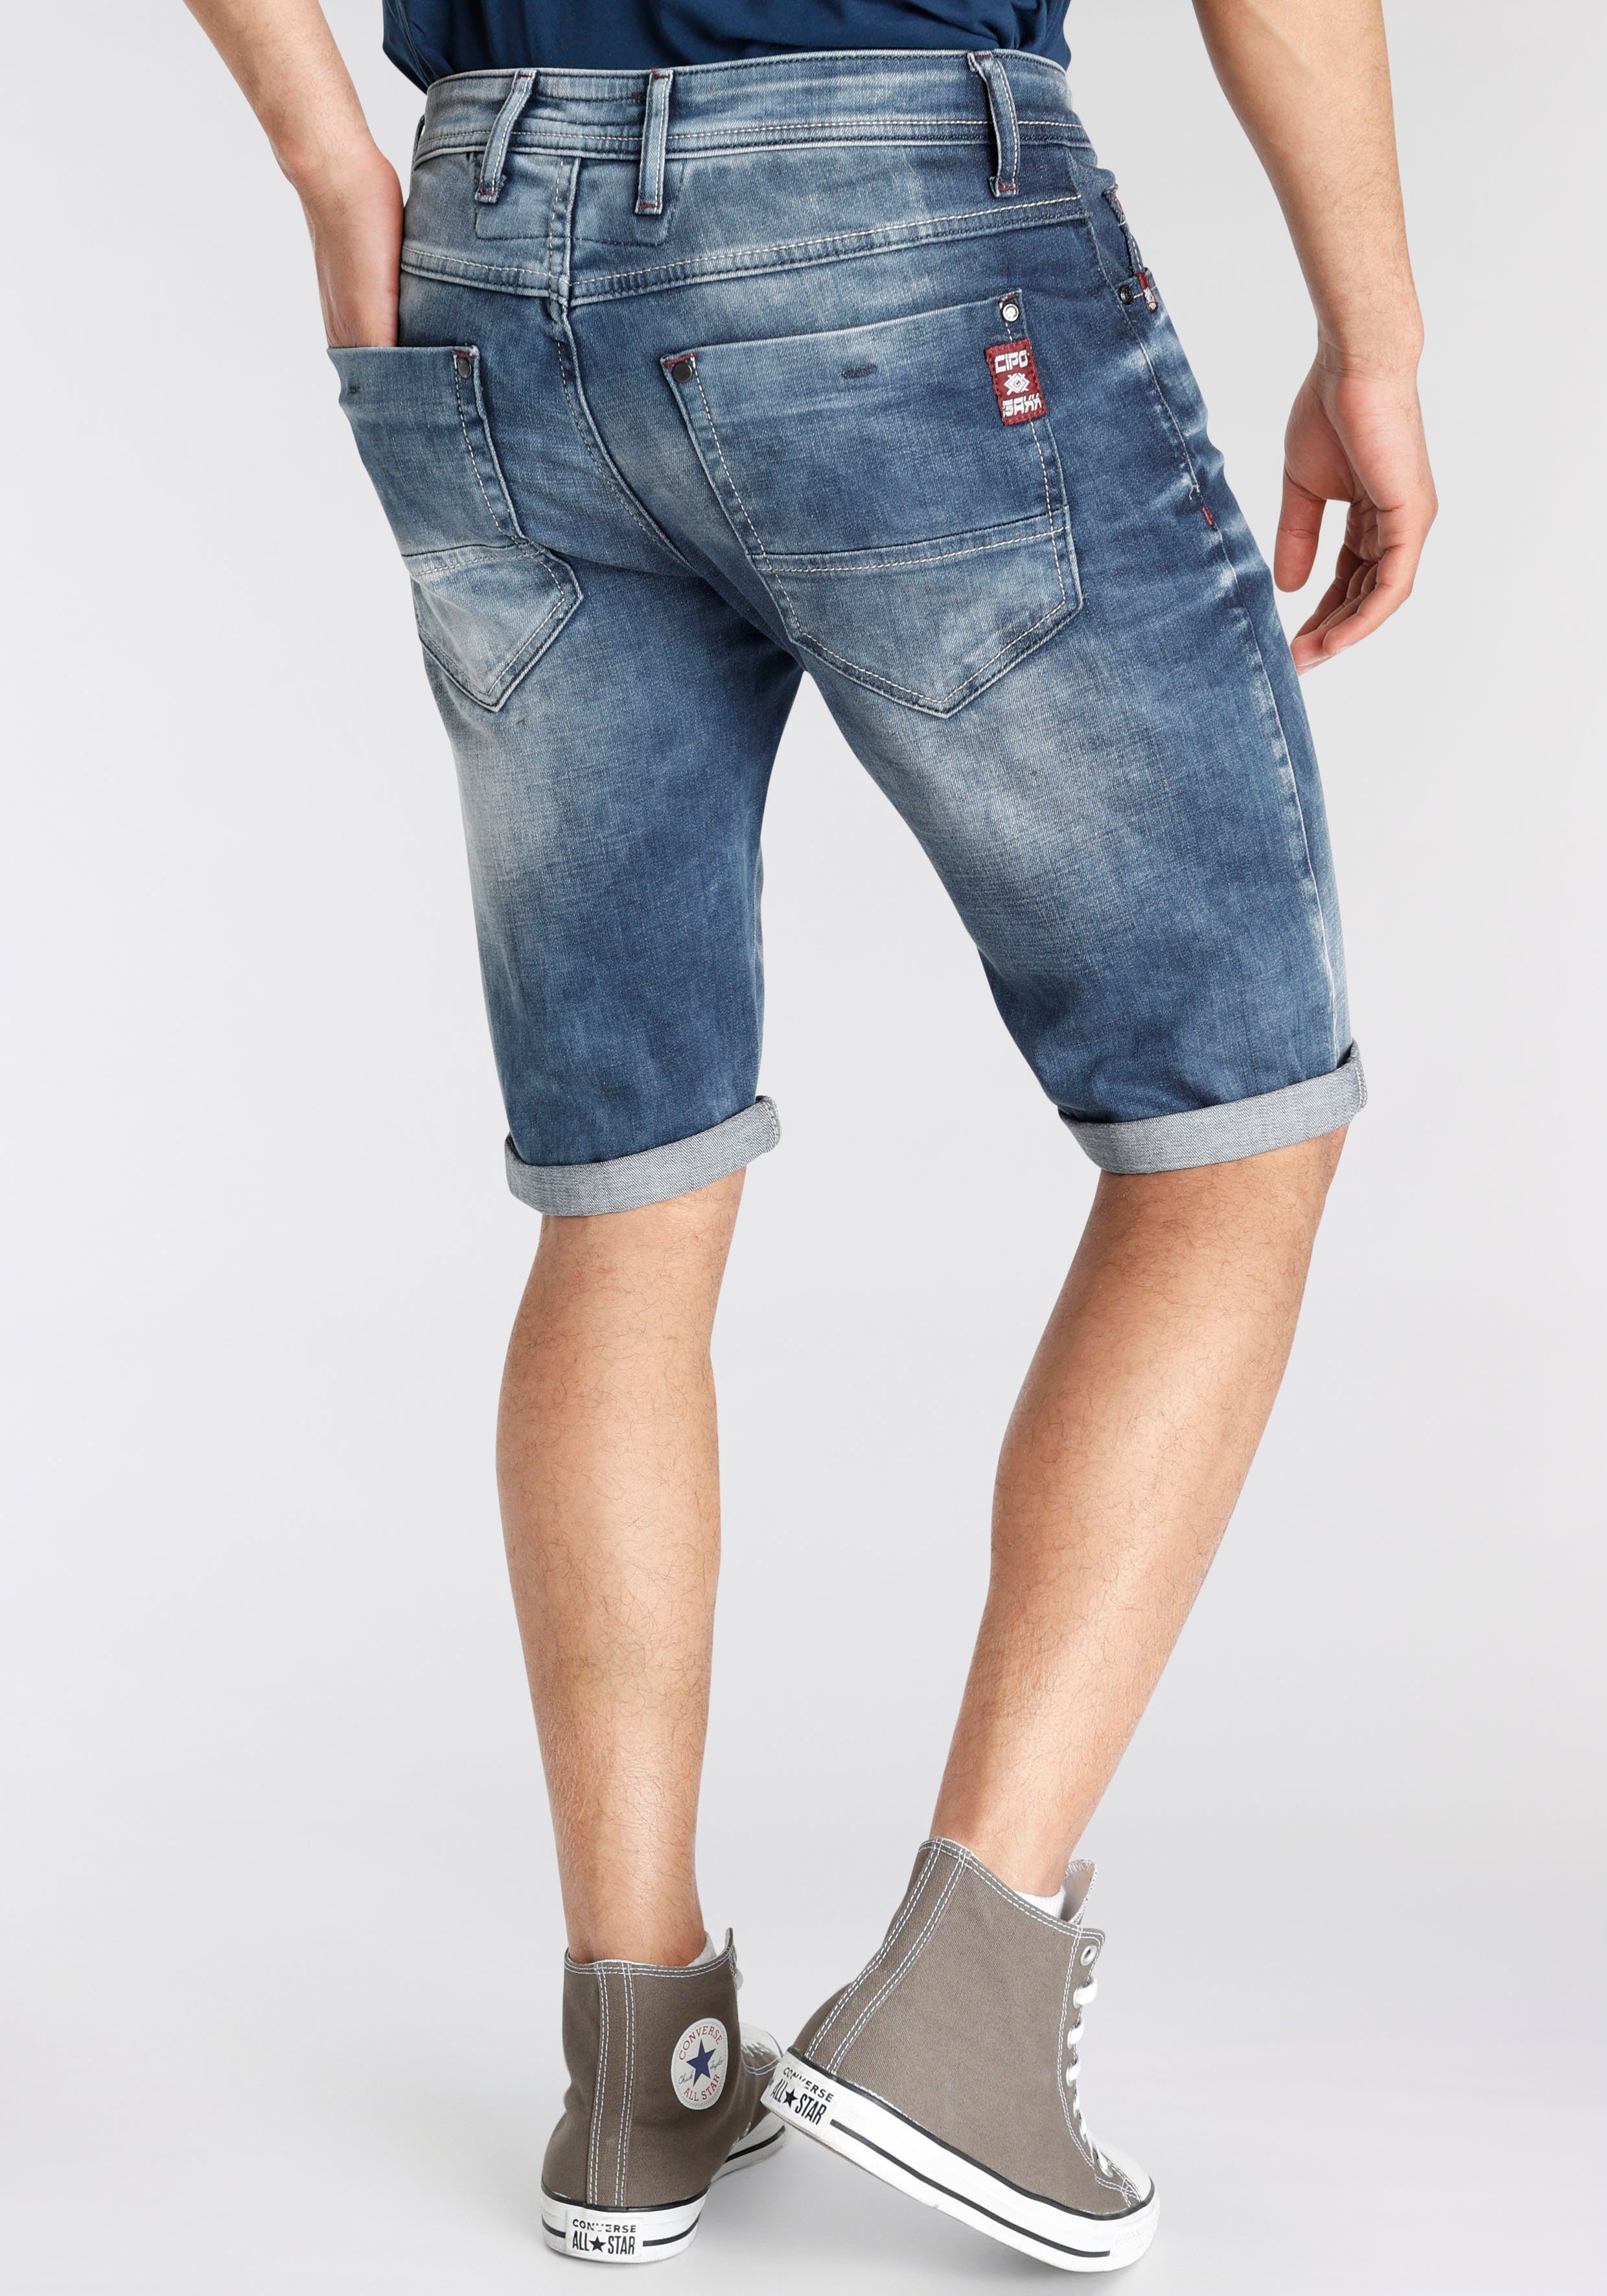 Cipo & Baxx Jeansshorts used blue